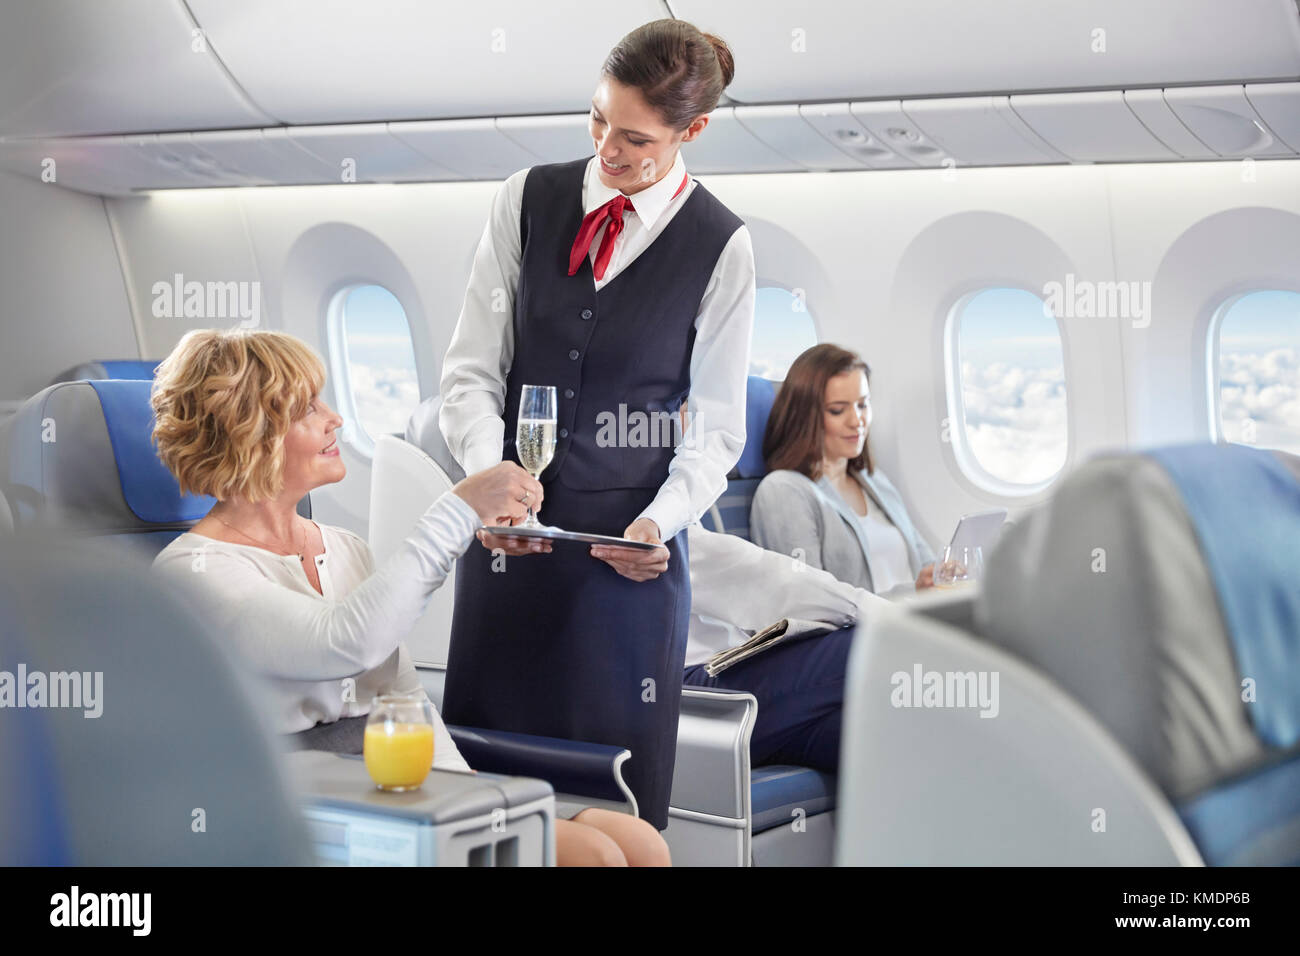 Flight attendant serving champagne to woman in first class on airplane Stock Photo